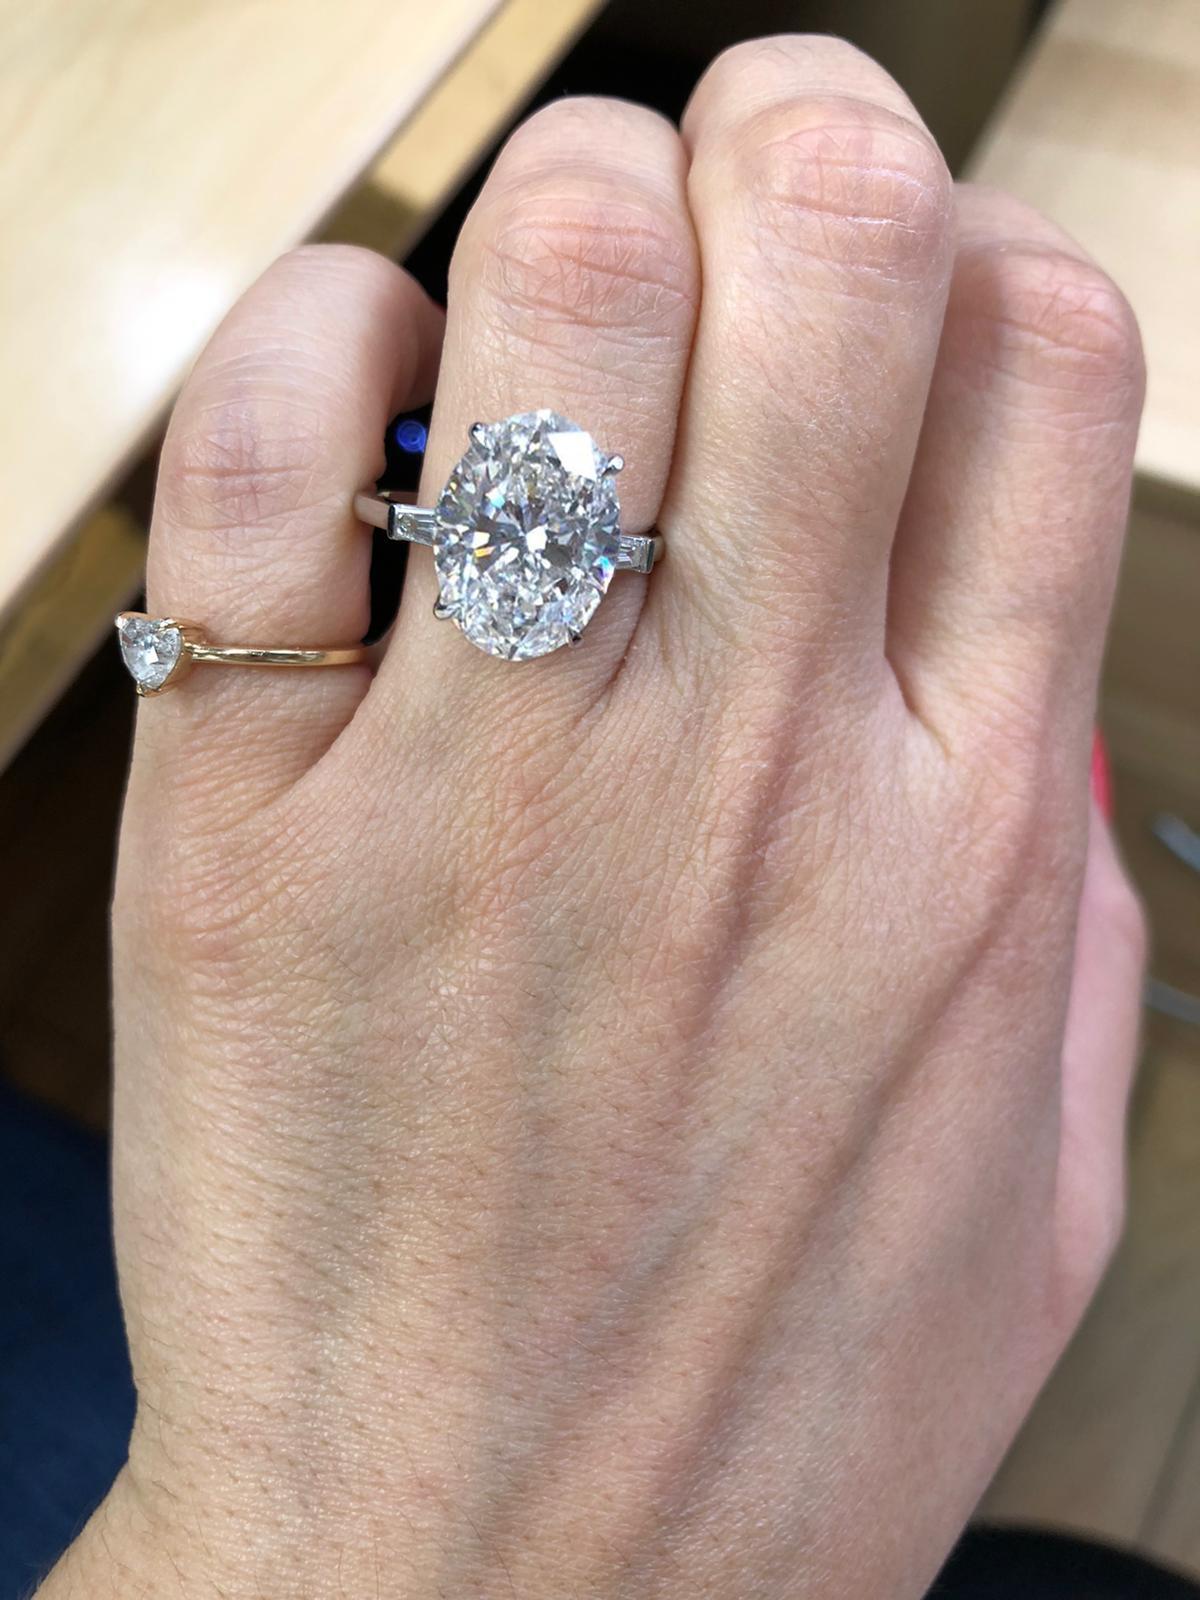 An exquisite 7 carat Type IIa diamond ring with an impressive lenght.

Take a look at the video 

This diamonds are regularly knocking down auction records.  Gems of this type are often called “Golconda” diamonds after the famous Indian mines that